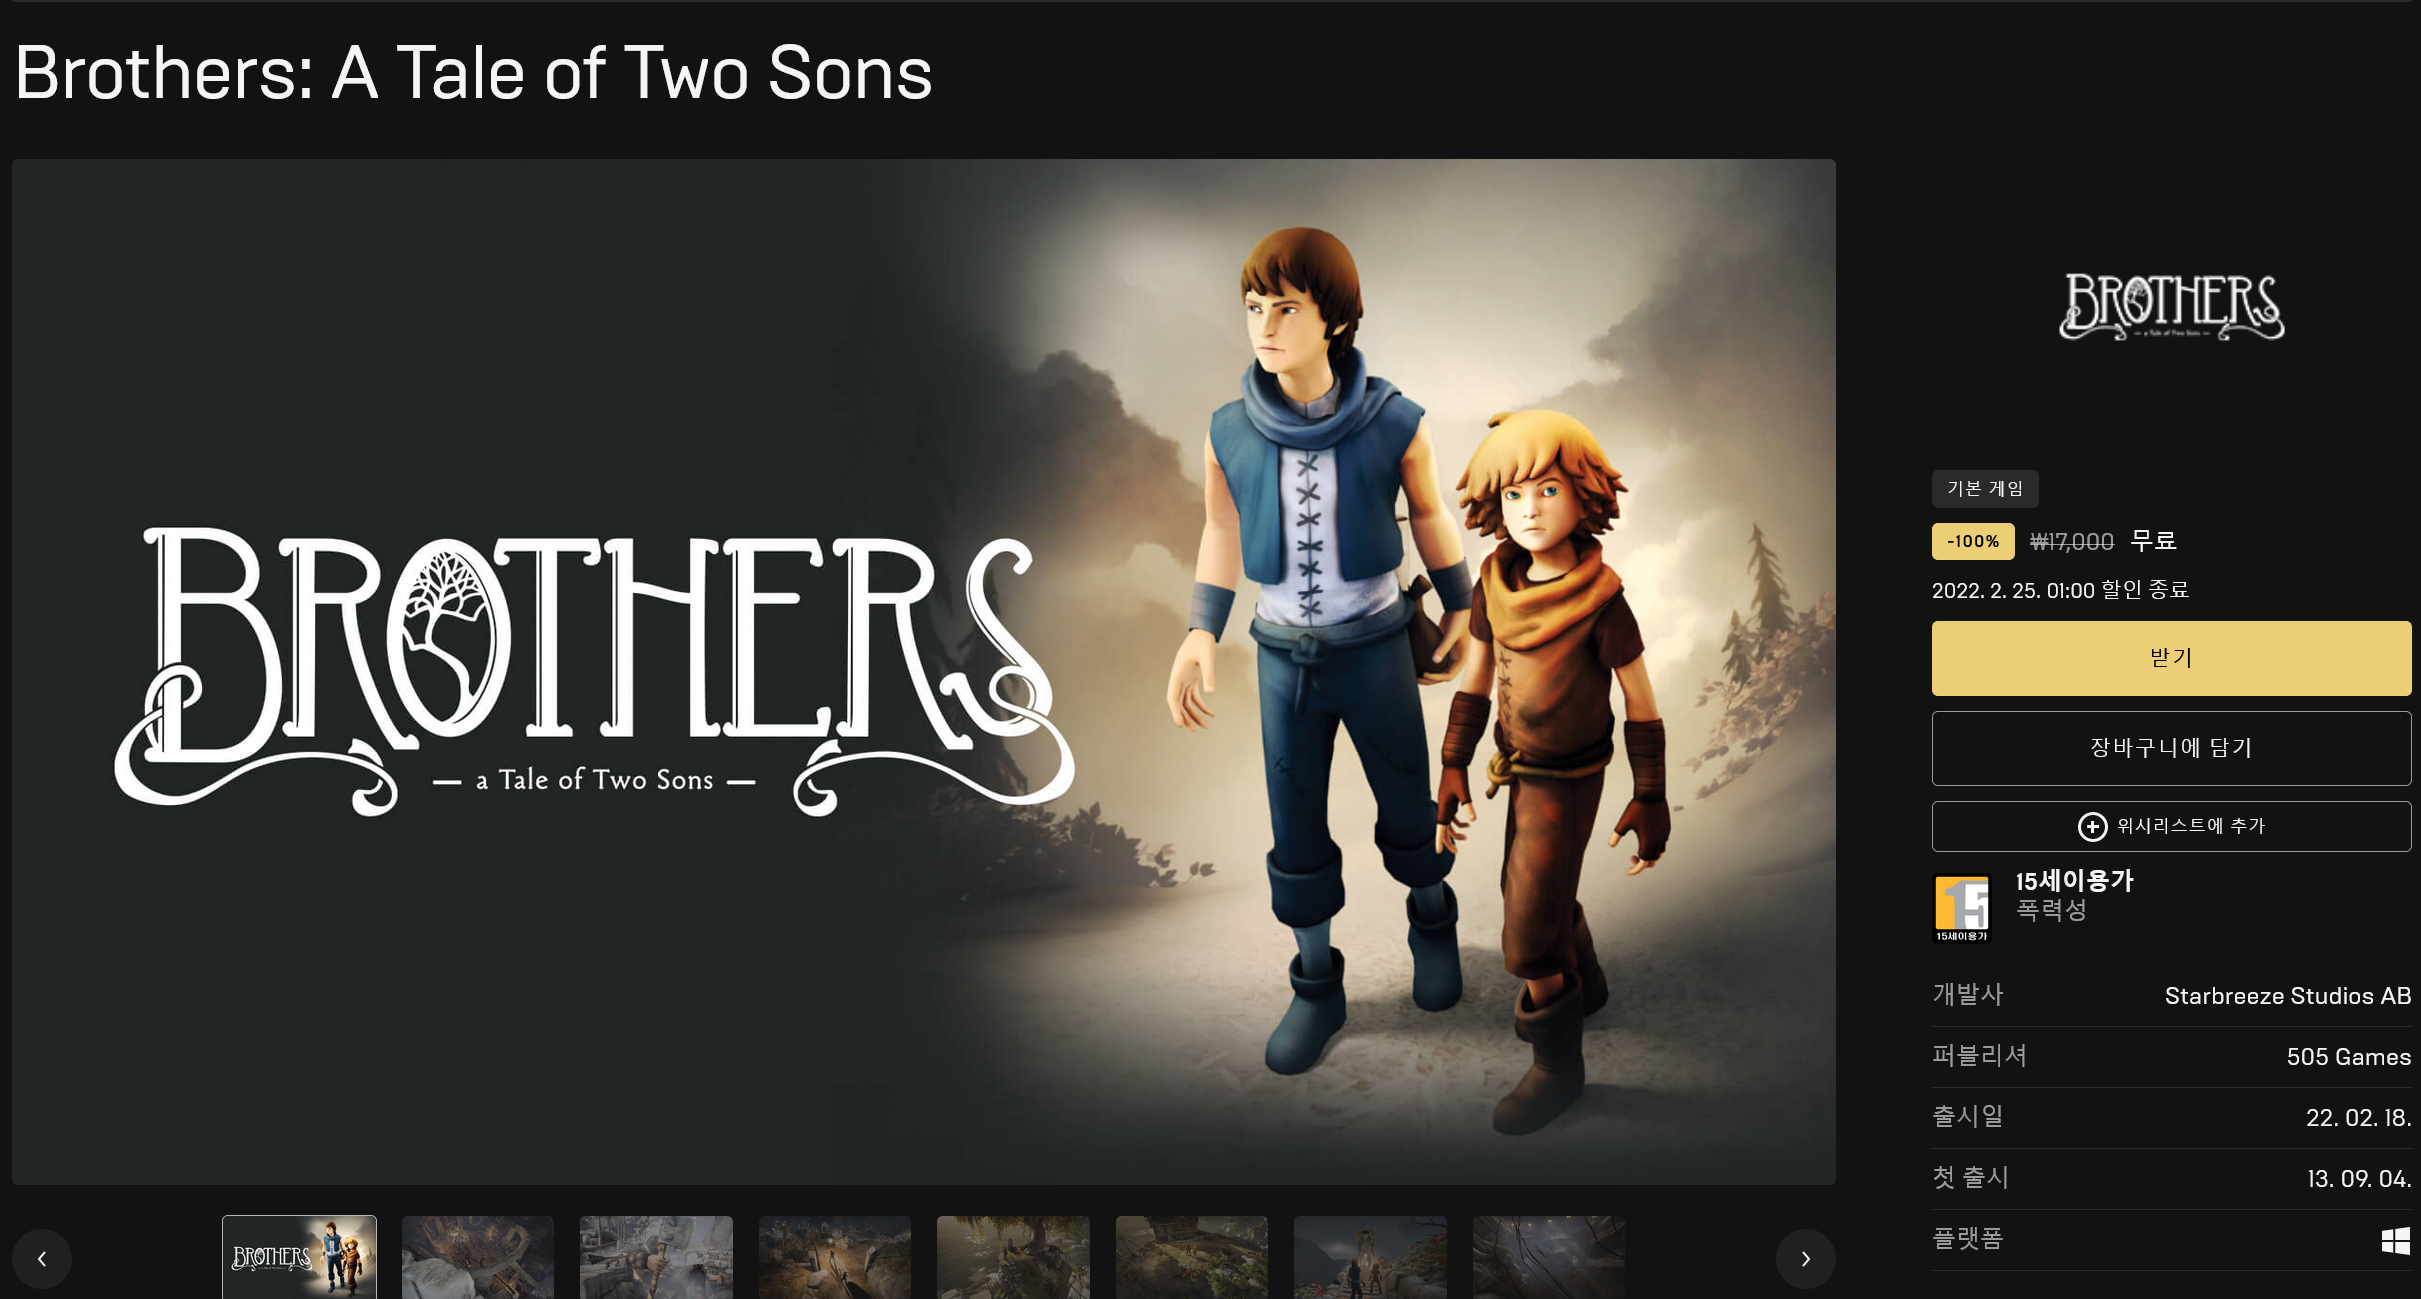 Screenshot 2022-02-18 at 01-08-43 Brothers - A Tale of Two Sons 오늘 다운로드 및 구매 - Epic Games Store.png